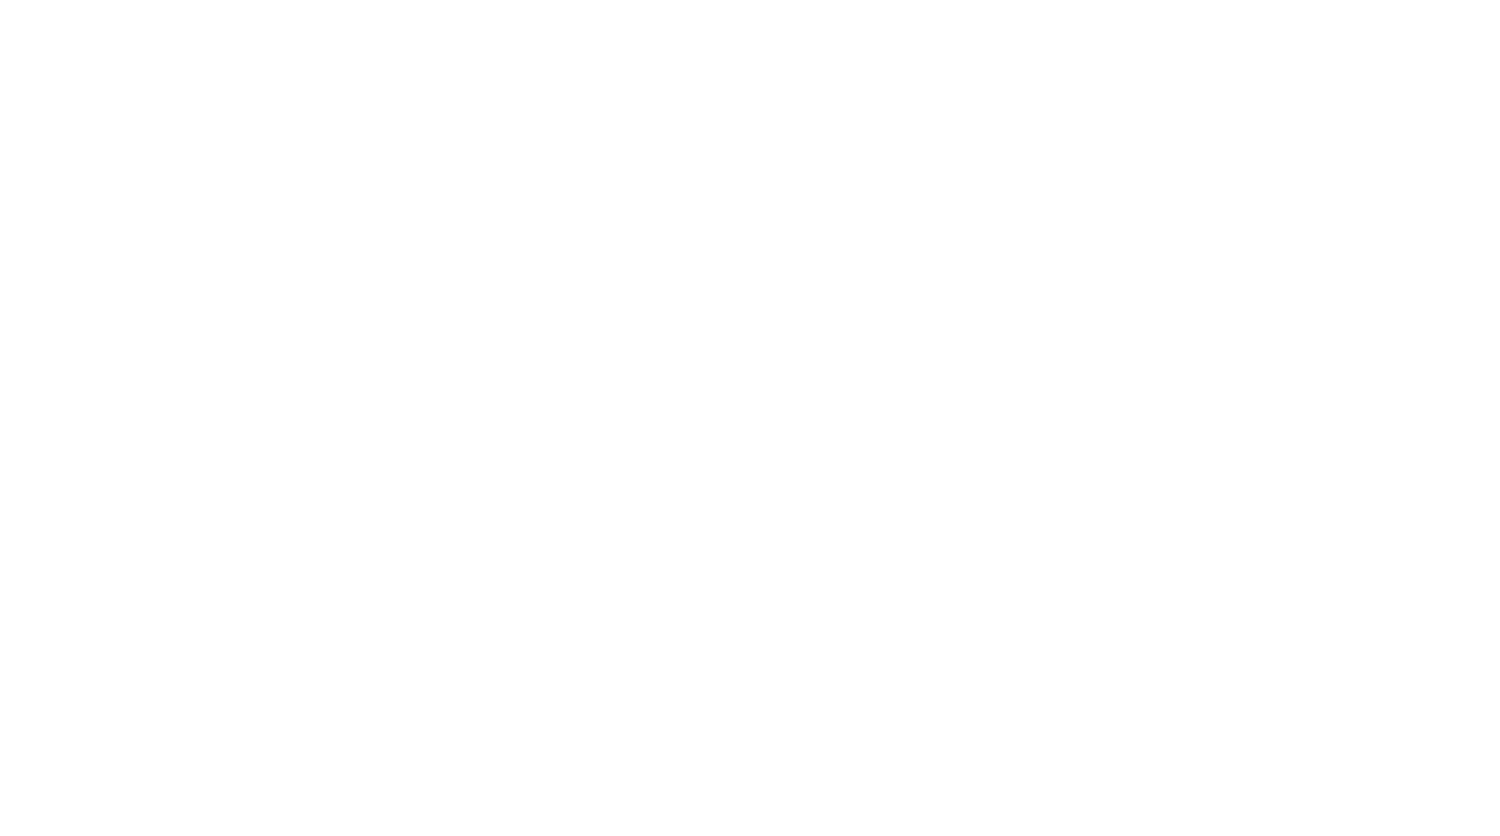 Total Access Rehearsal